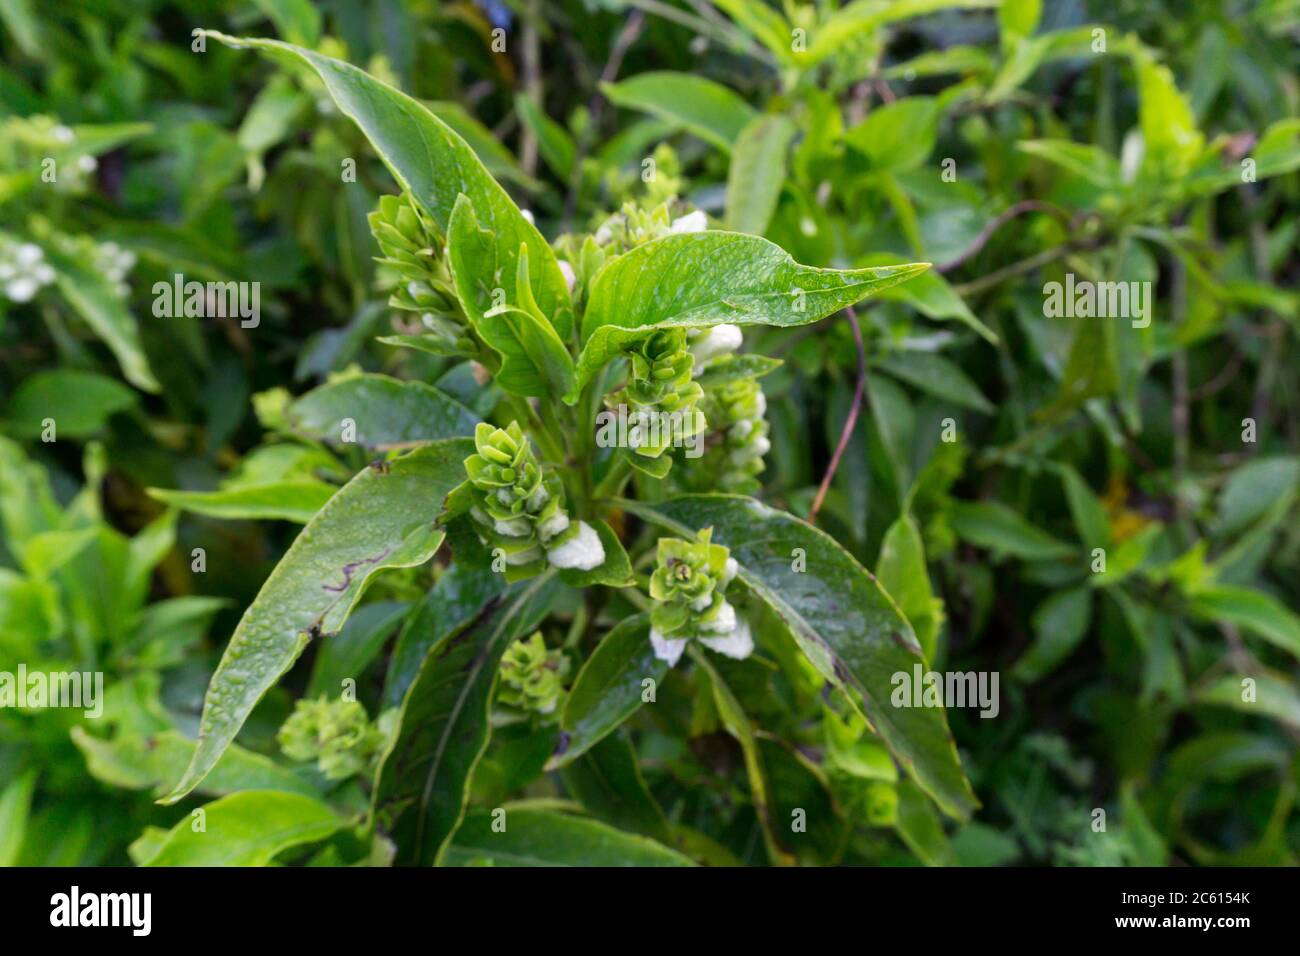 A closeup shot of Justicia adhatoda,commonly known as Malabar nut,adulsa, adhatoda, a medicinal plant native to Asia,widely used in Siddha Medicine, A Stock Photo